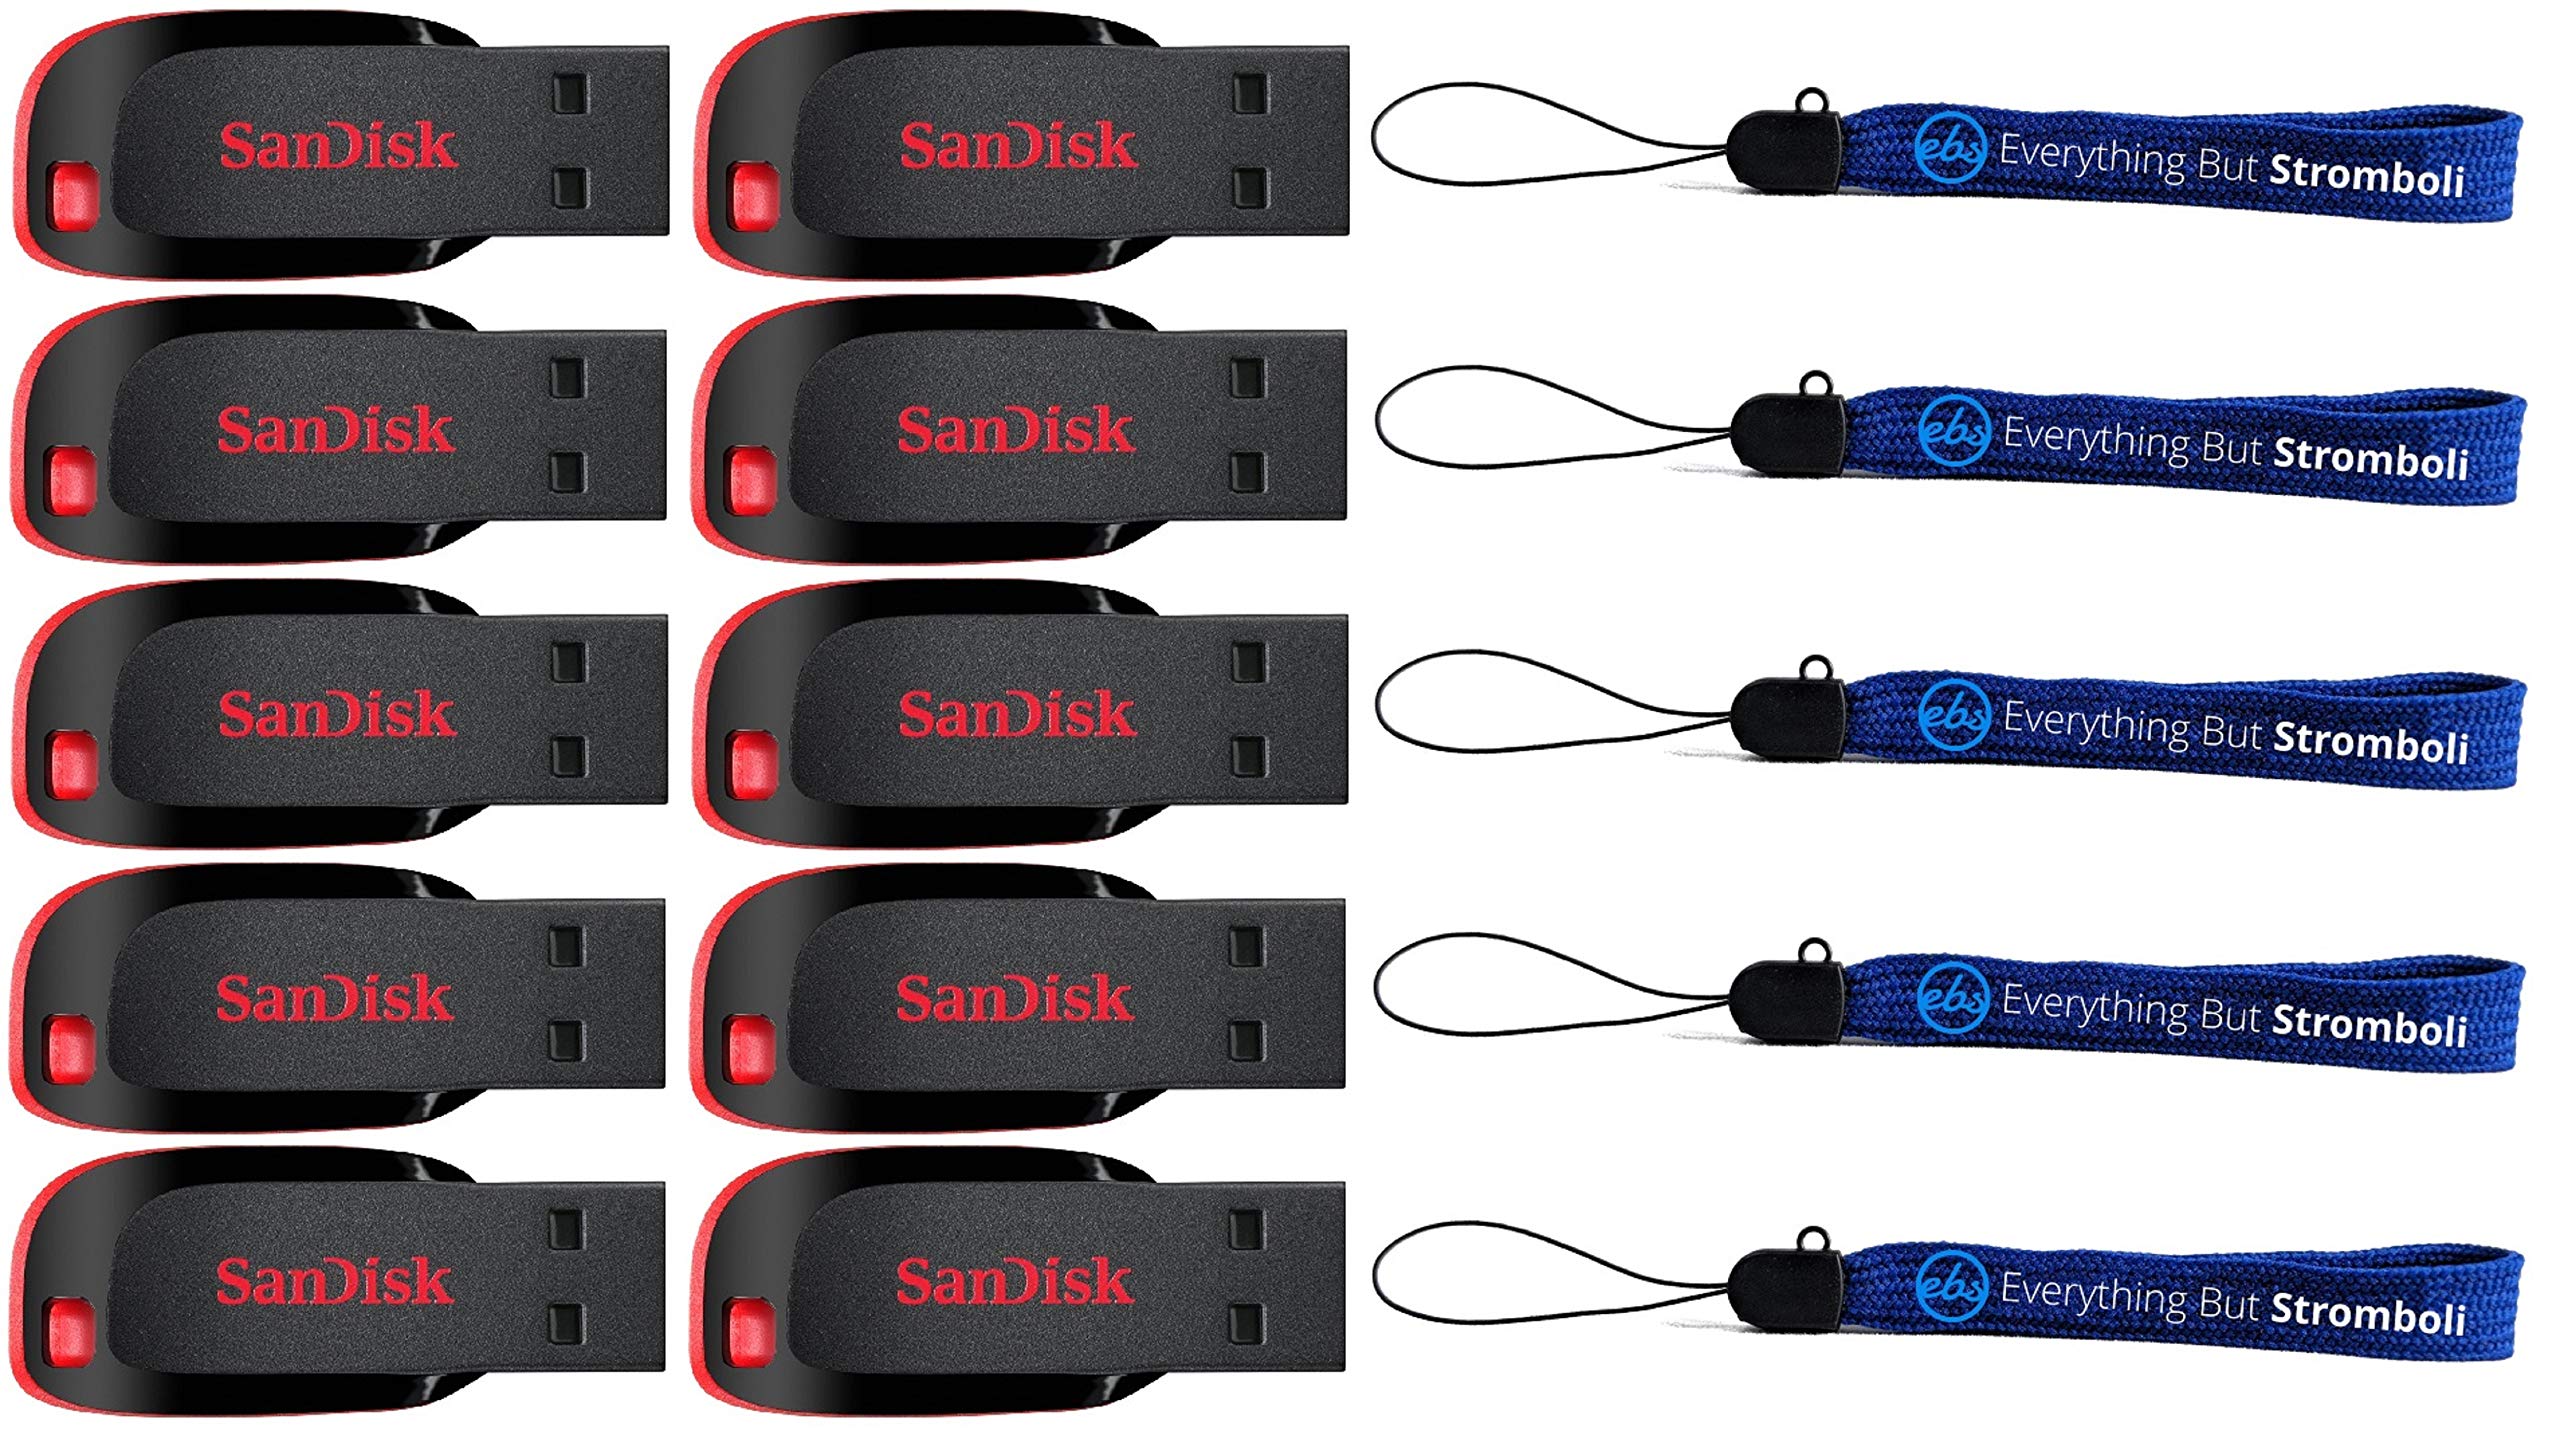 Book Cover SanDisk Cruzer Blade 32GB (10 Pack) USB 2.0 Flash Drive Jump Drive Pen Drive SDCZ50-032G - Ten Pack Bundle with (5) Everything But Stromboli Lanyard 32GB 10 Pack